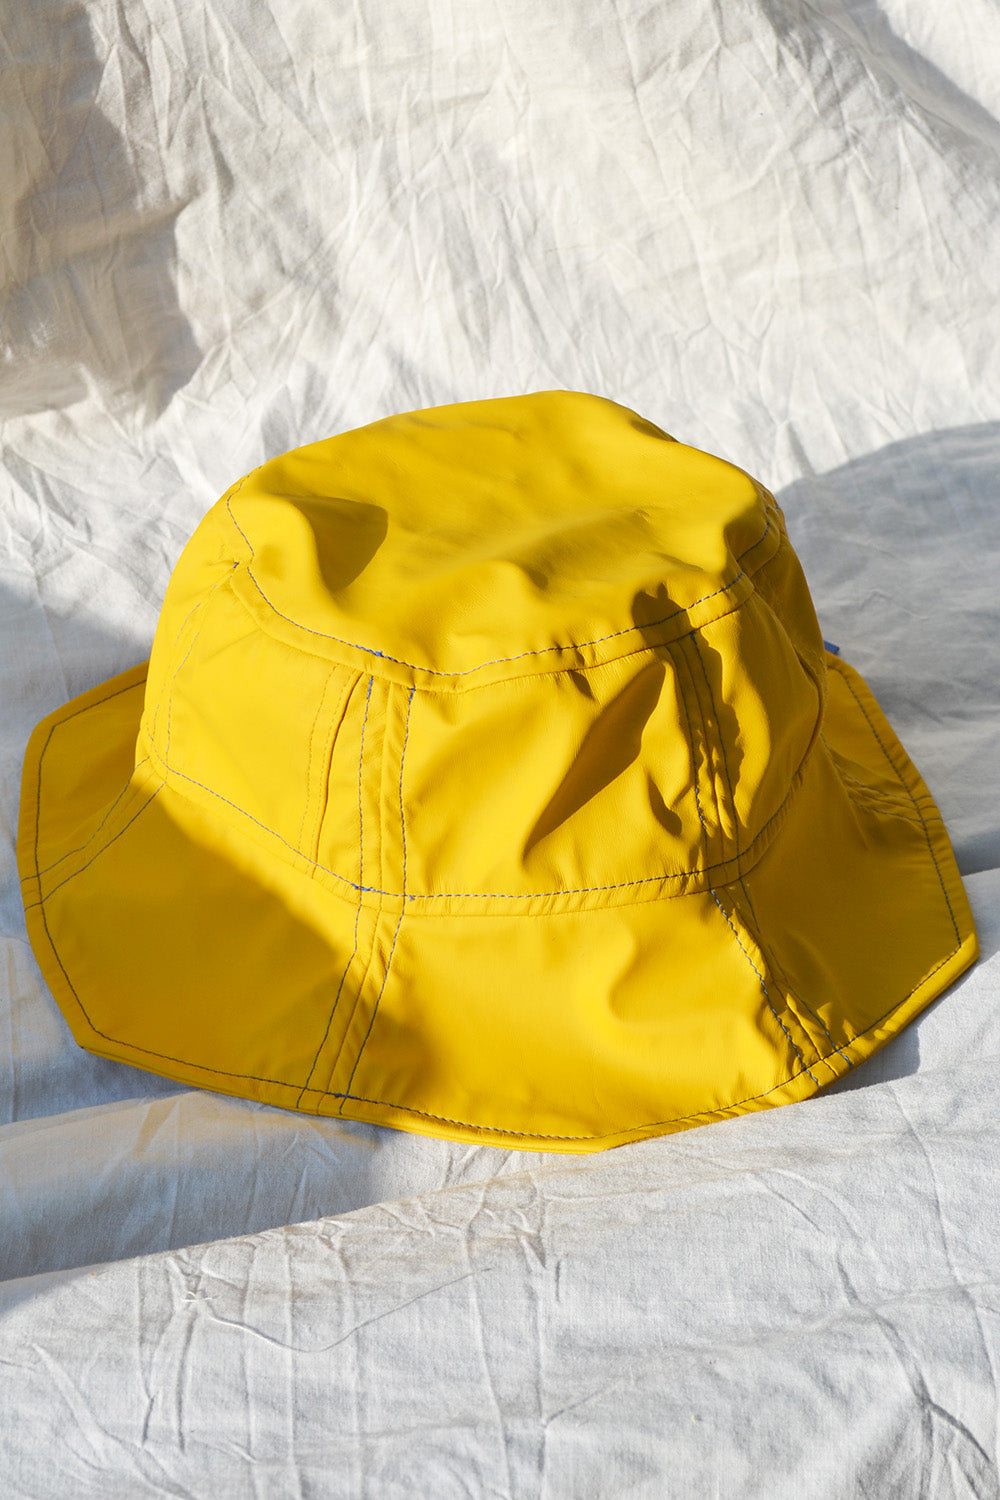 RTS LIMITED Upcycled Yellow Raincoat Hexy Hat 58cm